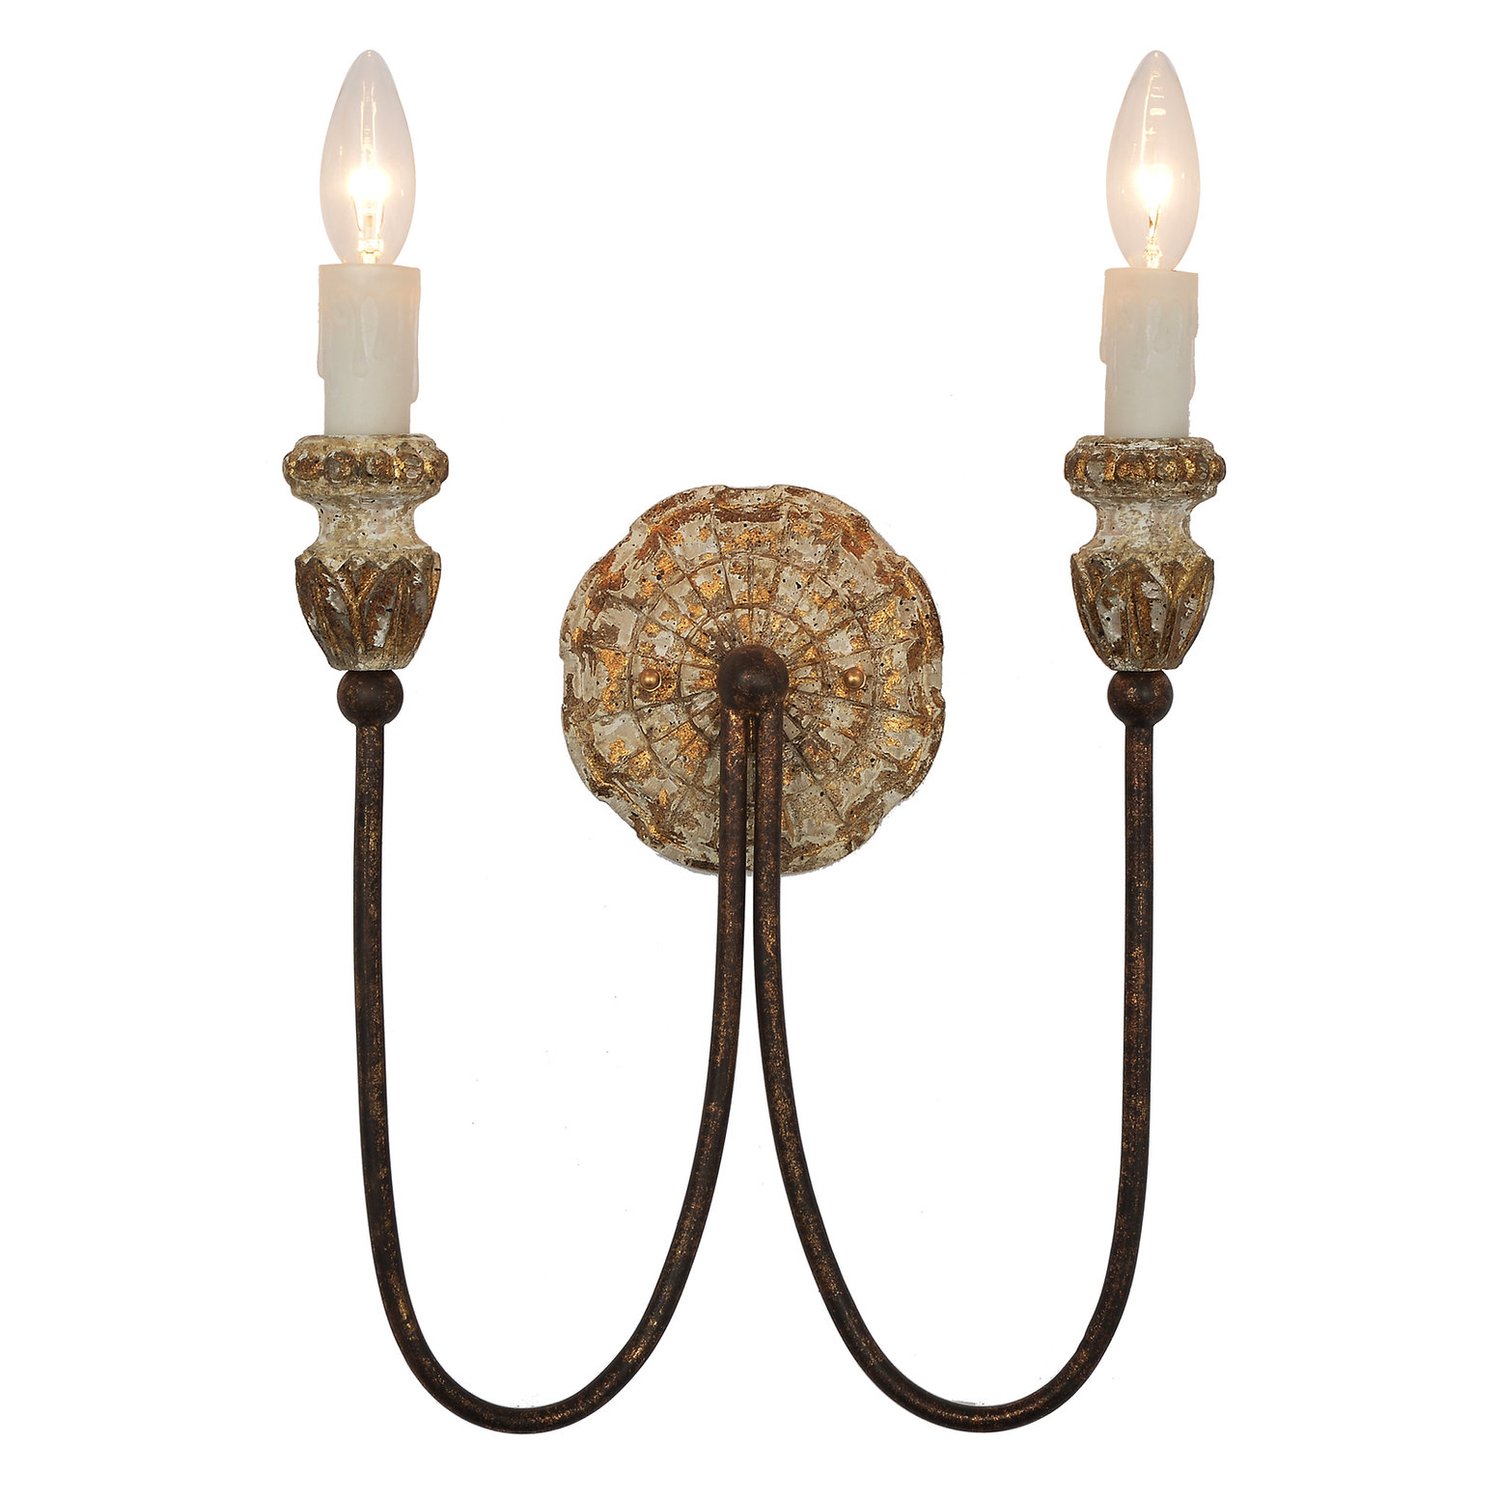 Image of A sophisticated and antiquarian-inspired rustic natural wood and iron 2-light wall sconce